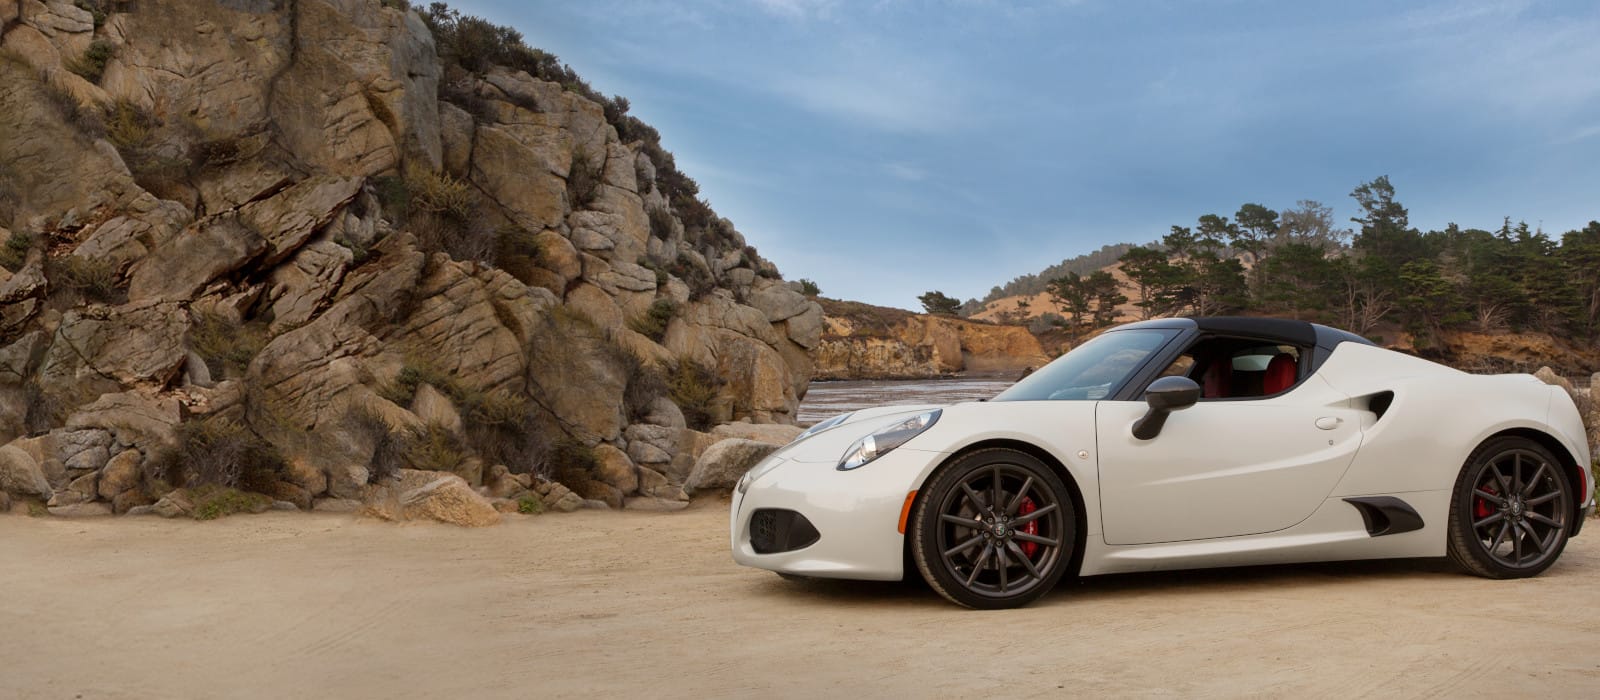 Alfa Romeo 4C Spider | Find Information, Parts, and More